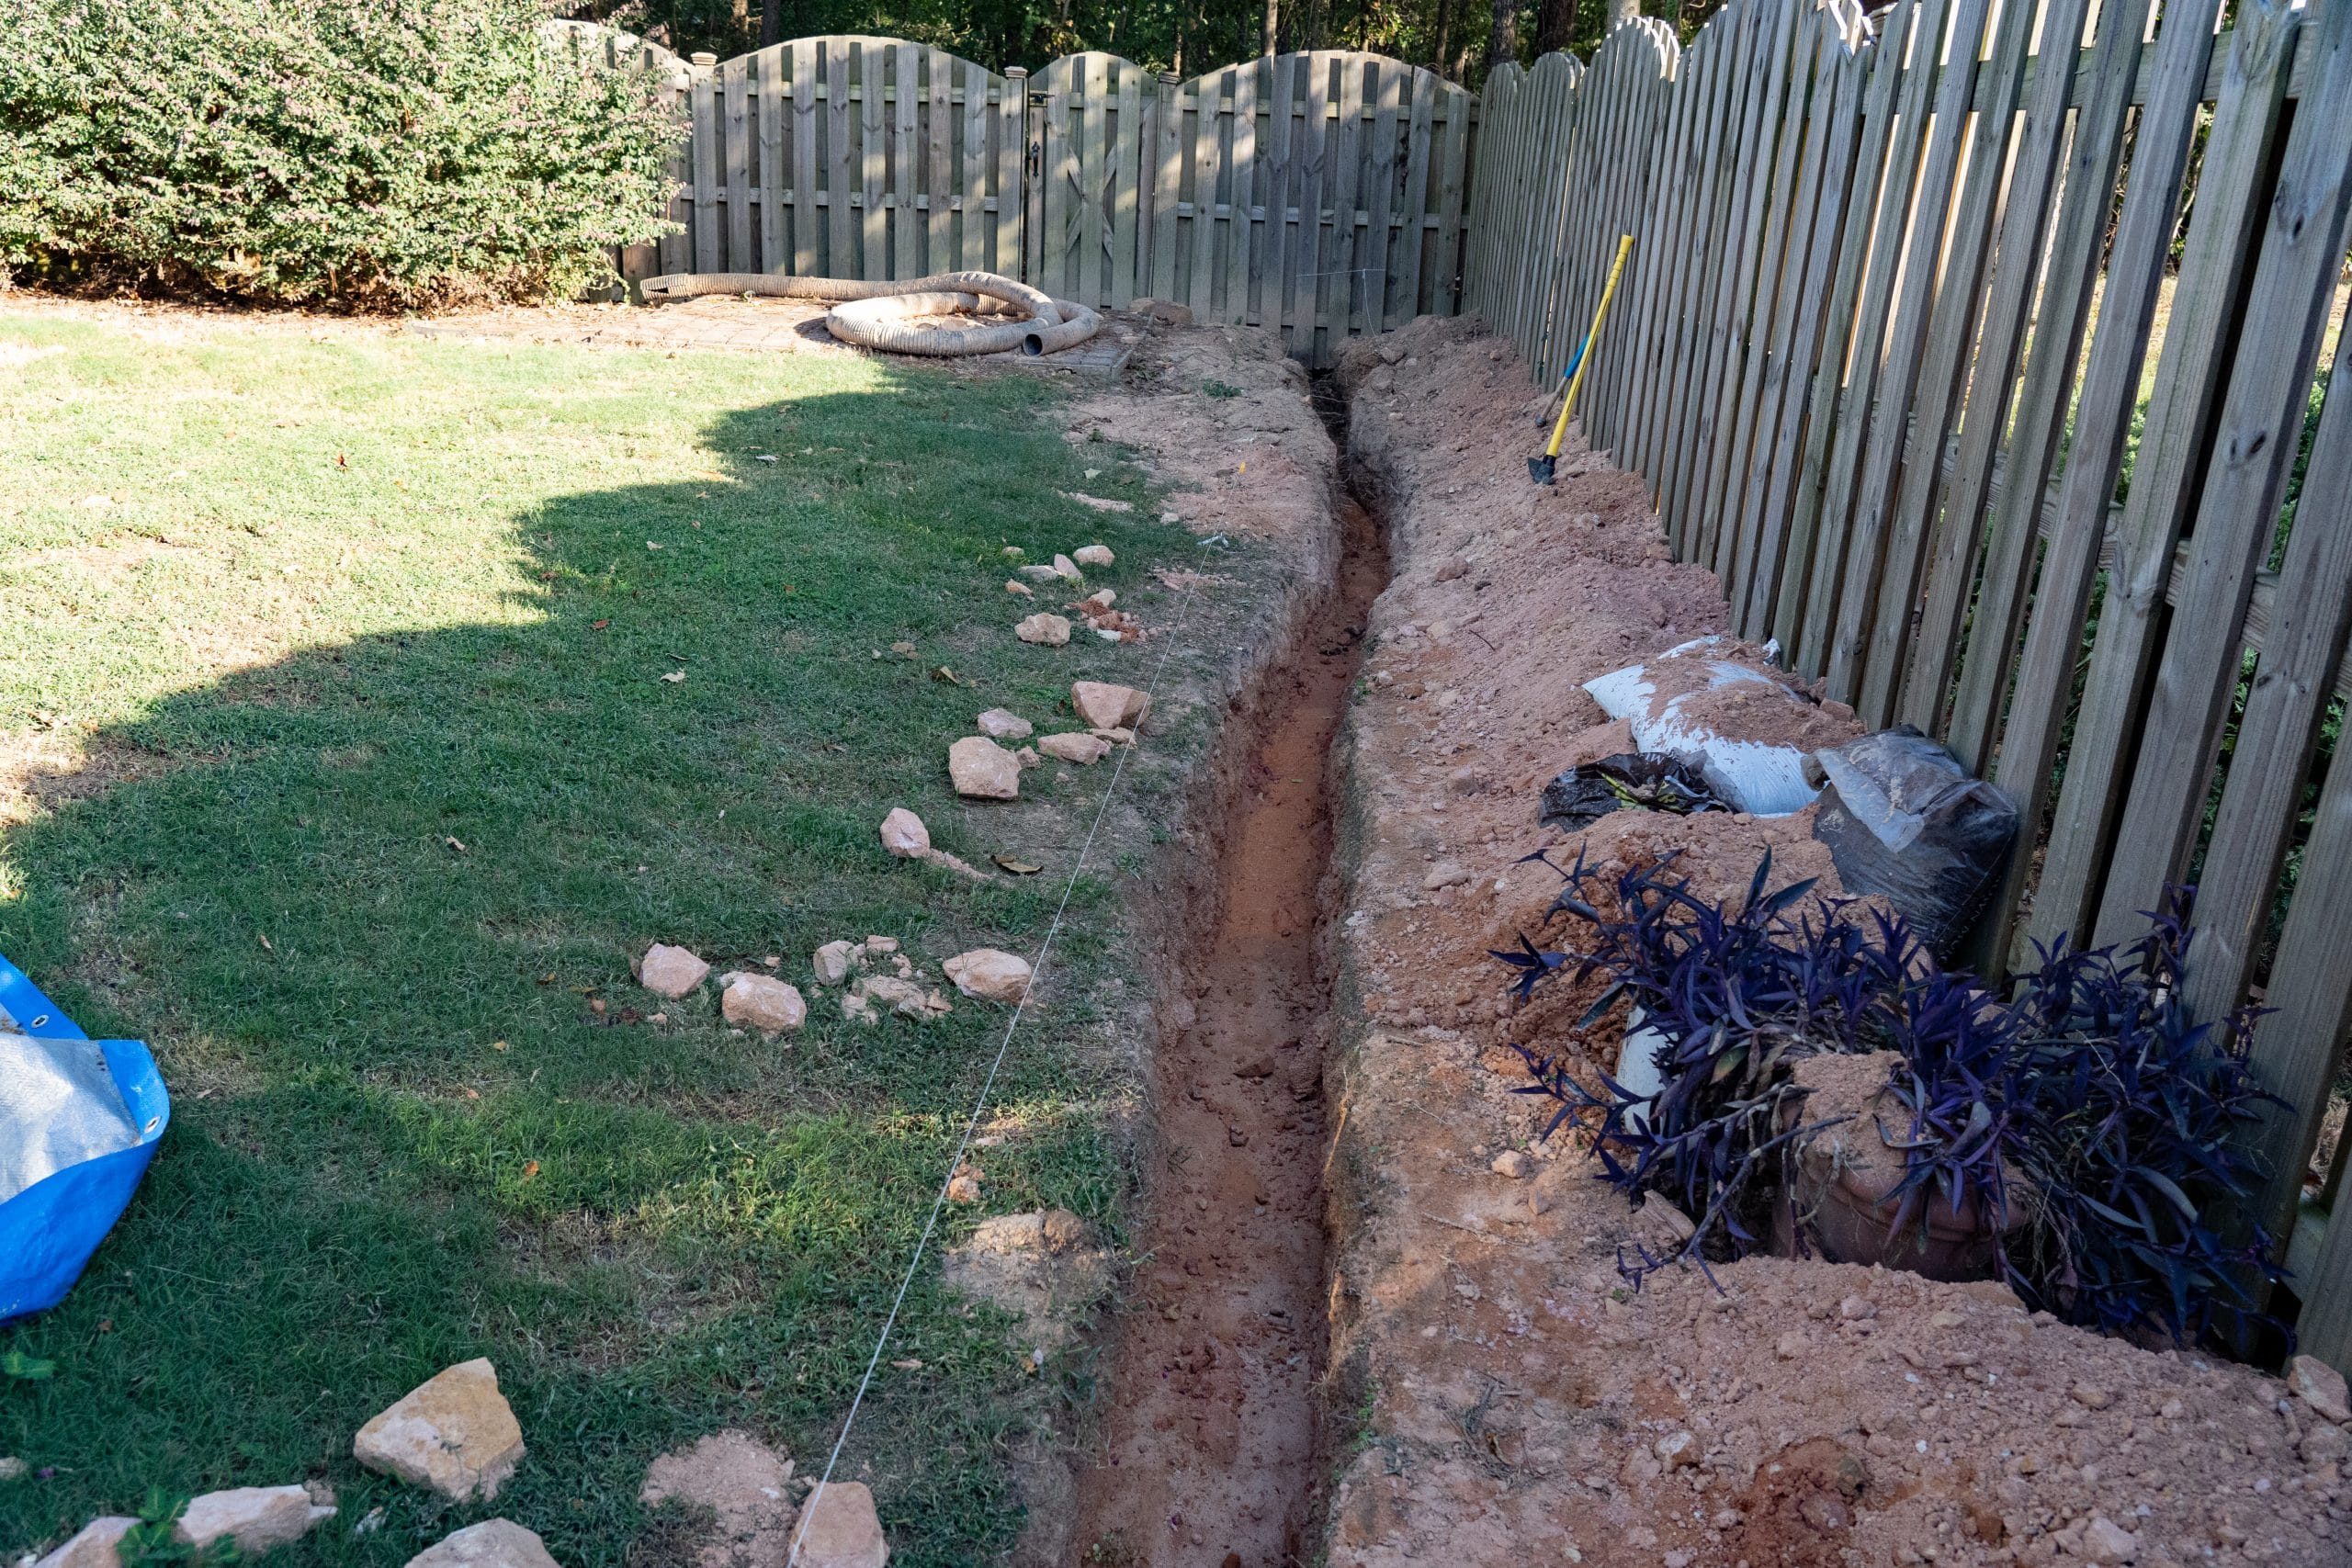 A trench is dug as the first step of a DIY French drain home